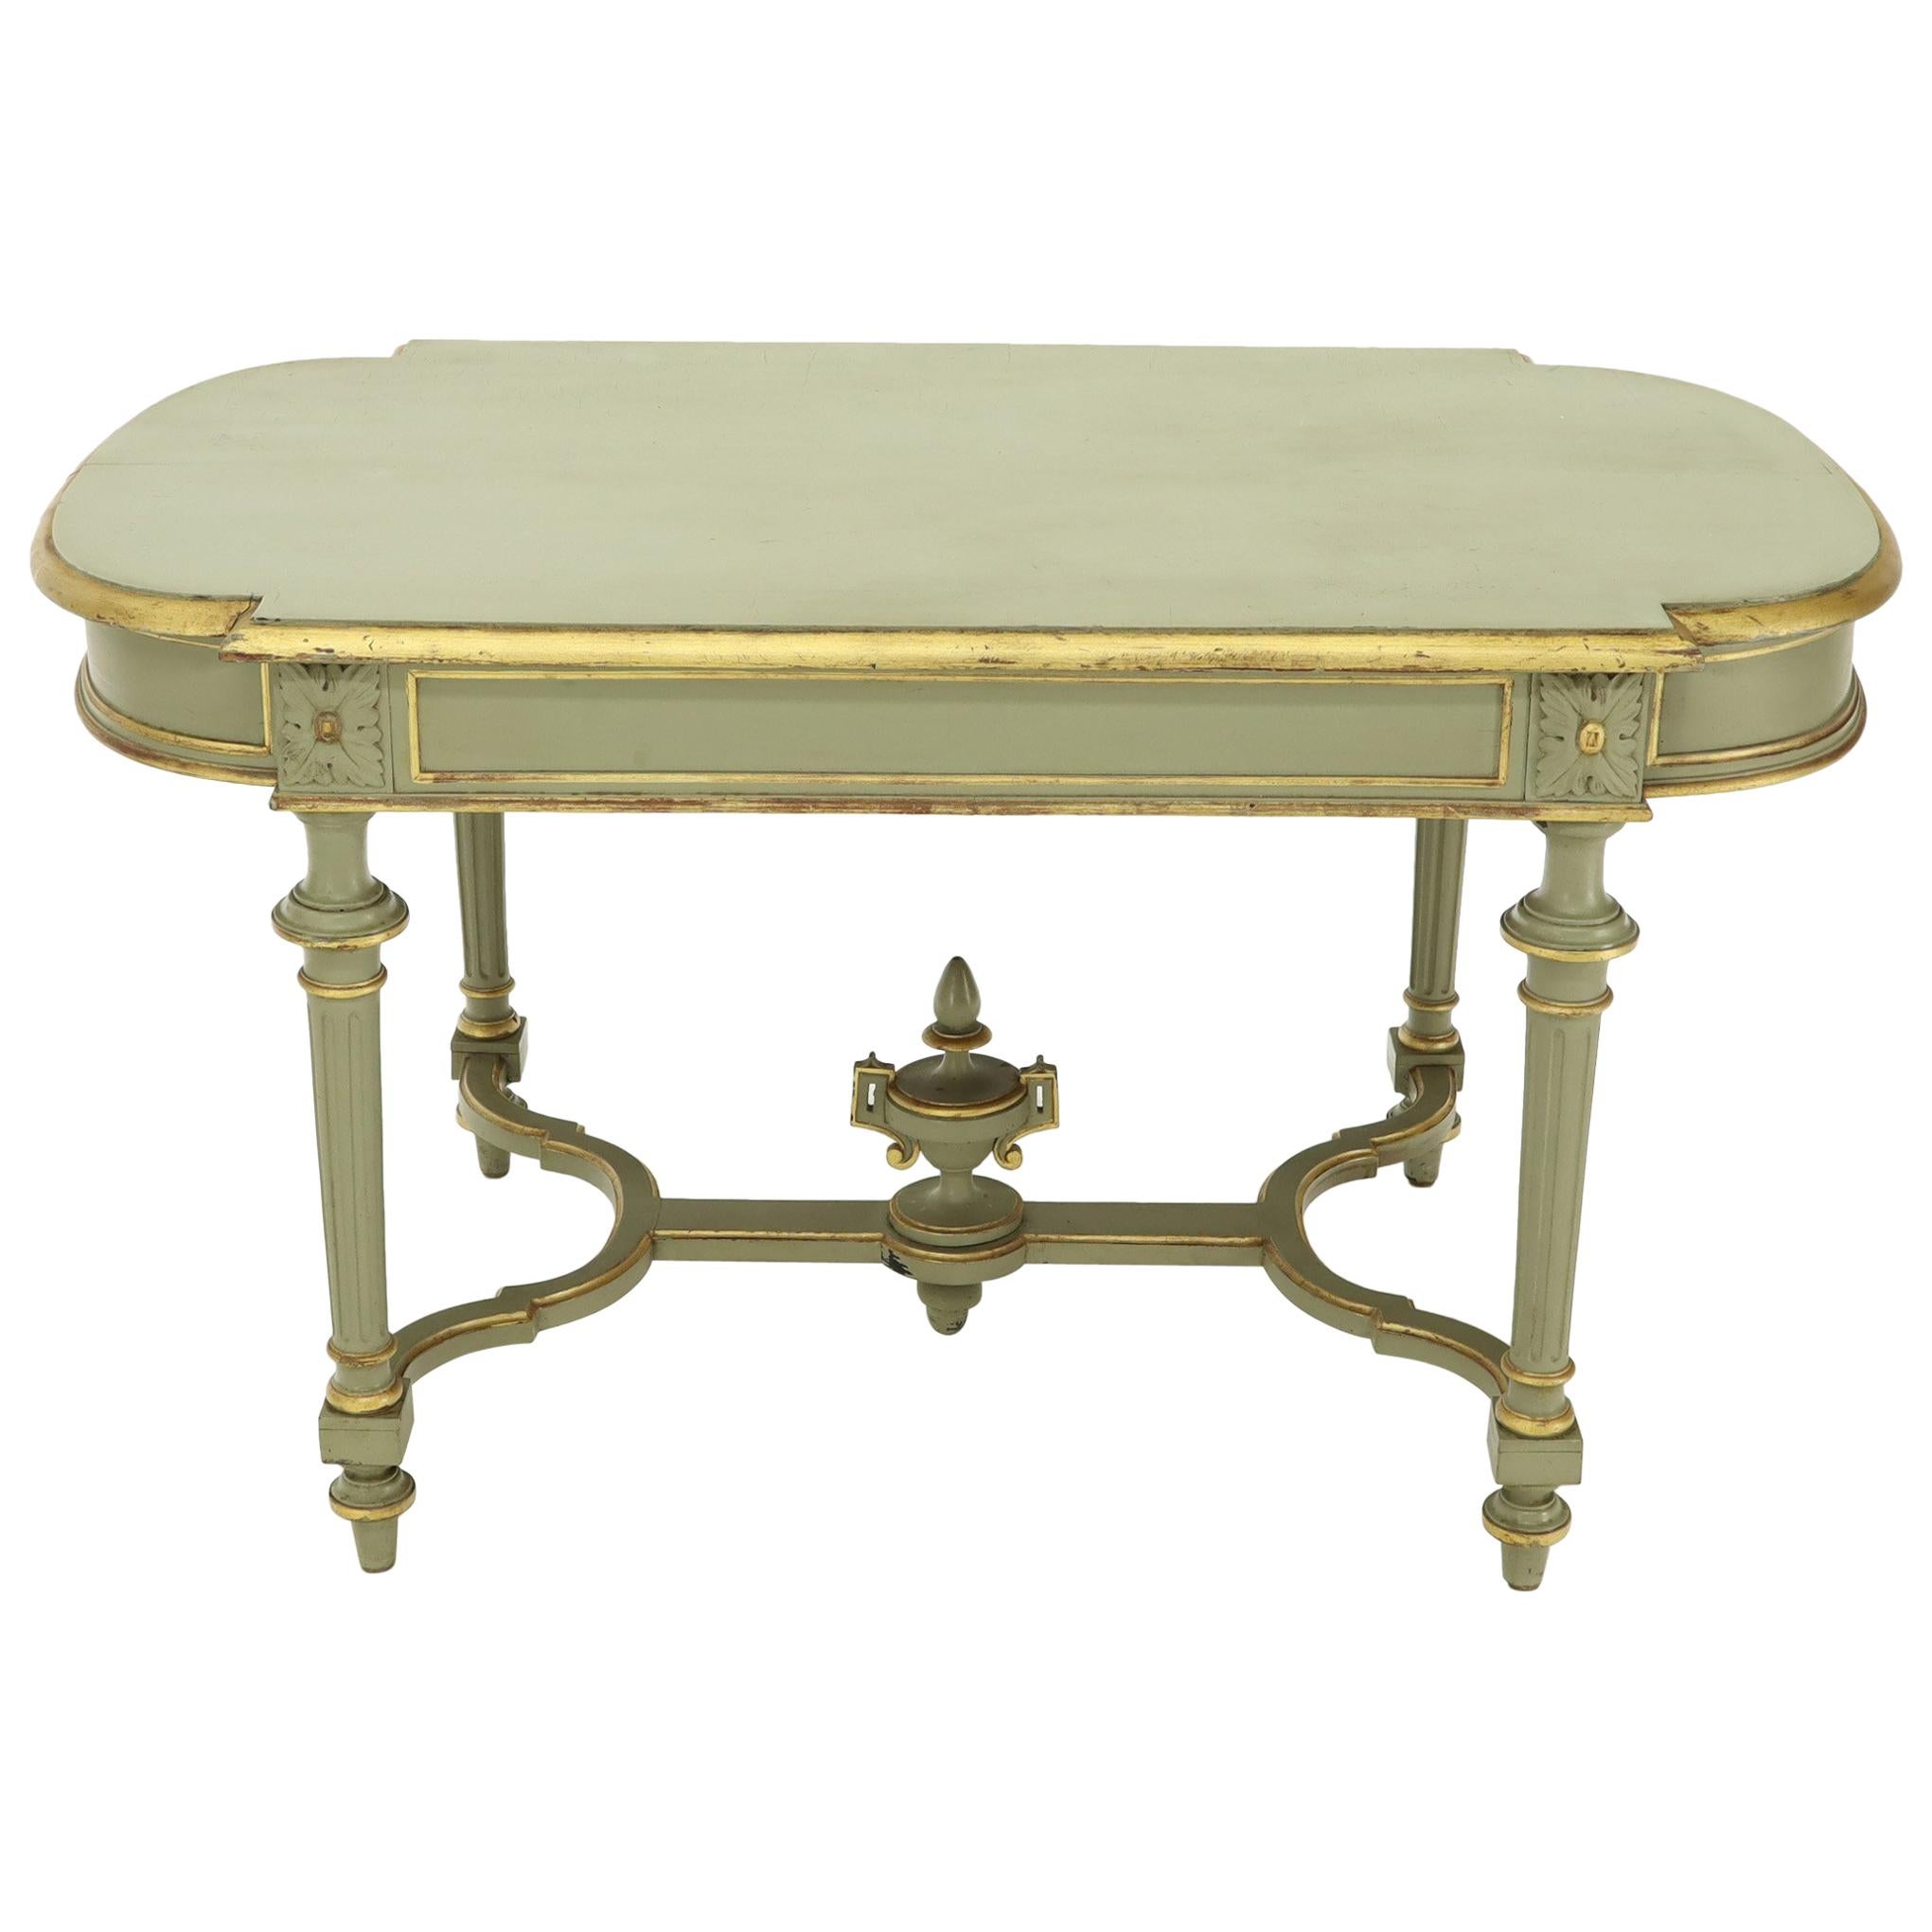 Shabby Chic and Gold Leaf Distressed Antique Writing Table Desk Large Console For Sale